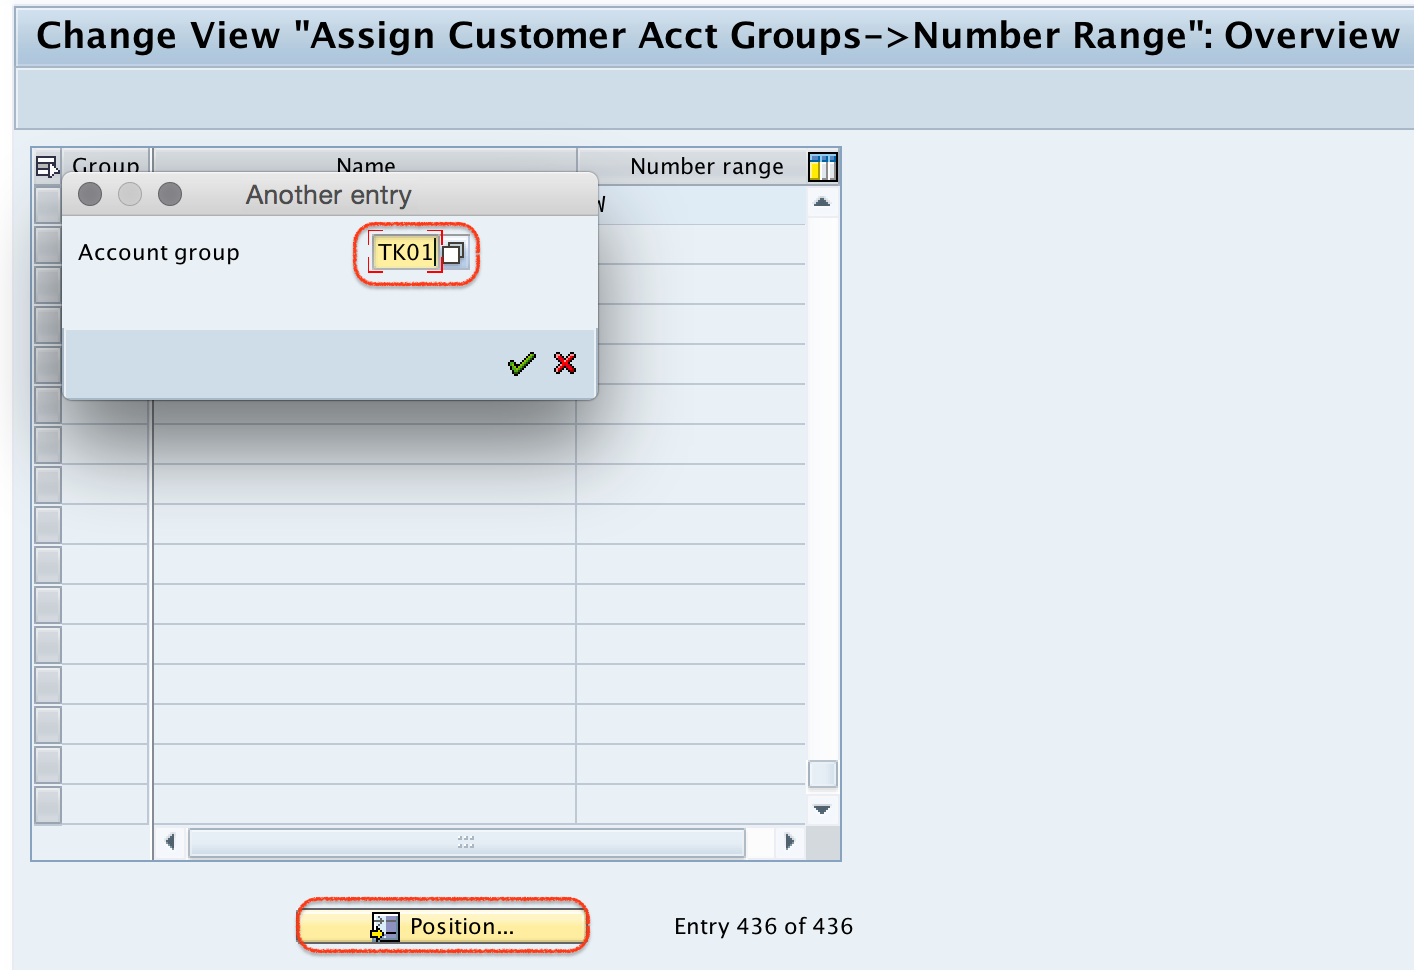 Assign Customer Acct Groups --> Number Range overview